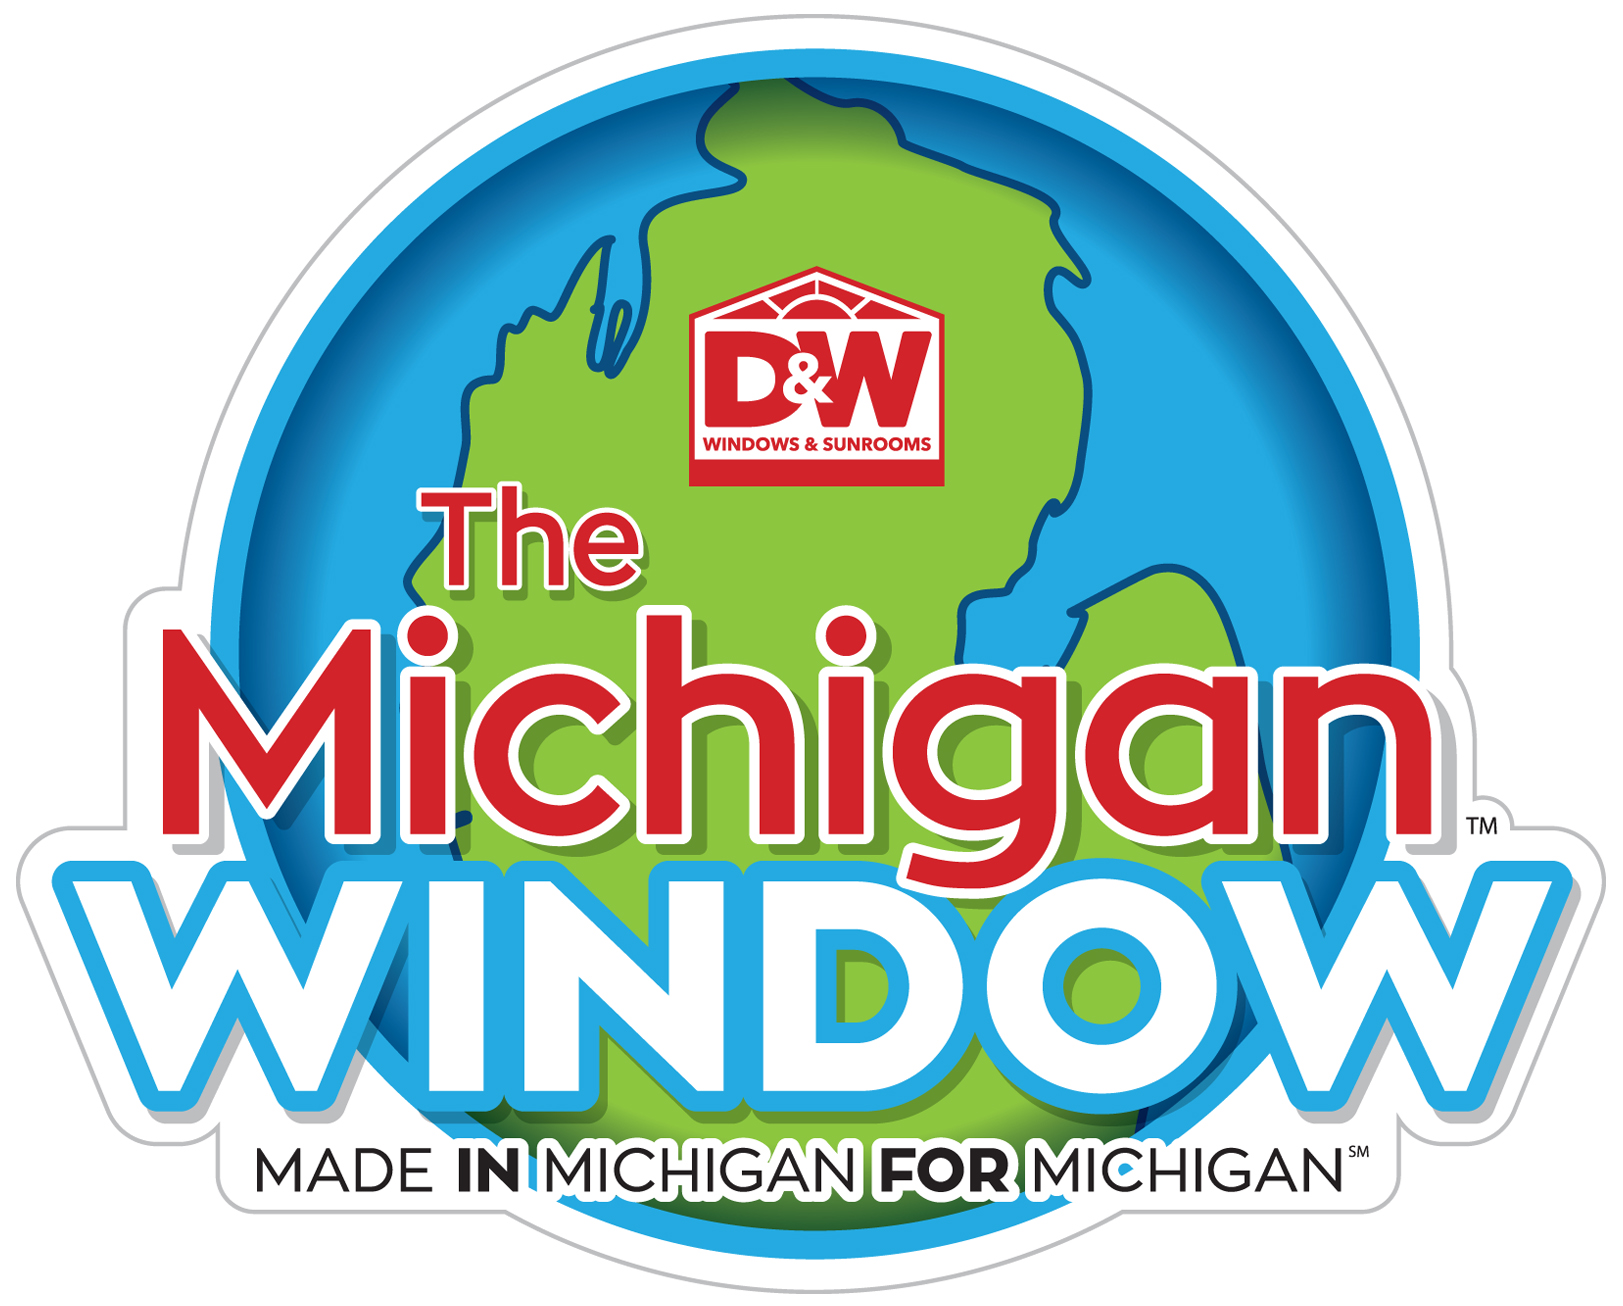 Replacement Windows   D&W Windows and Sunrooms